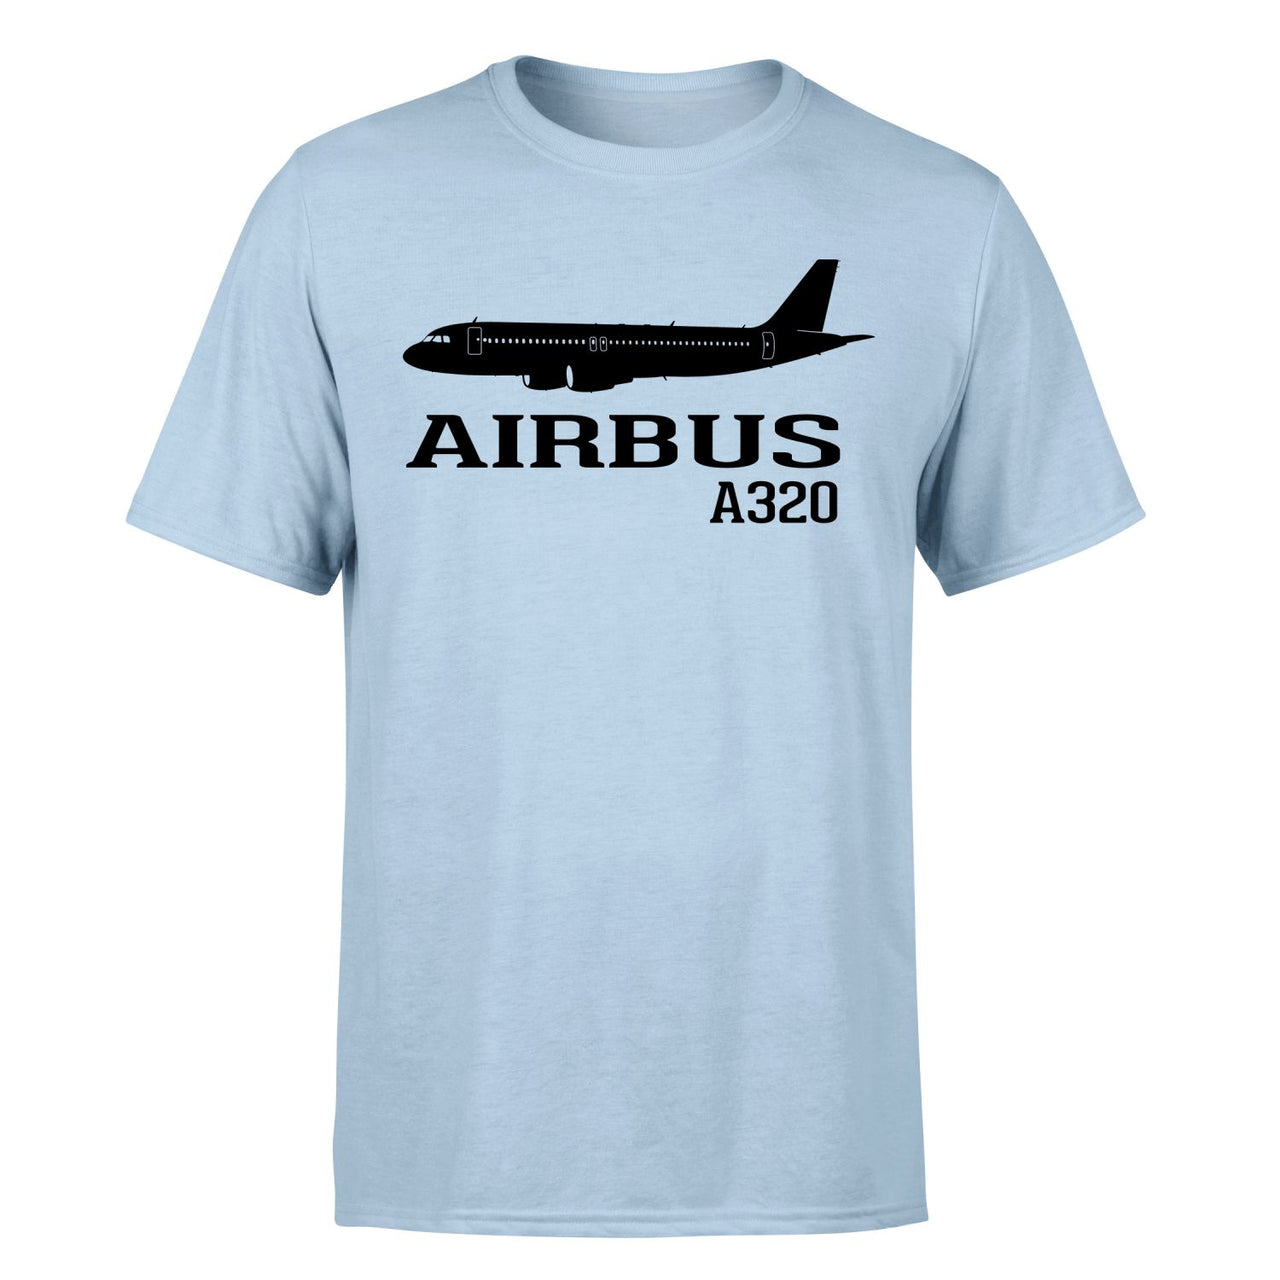 Airbus A320 Printed Designed T-Shirts